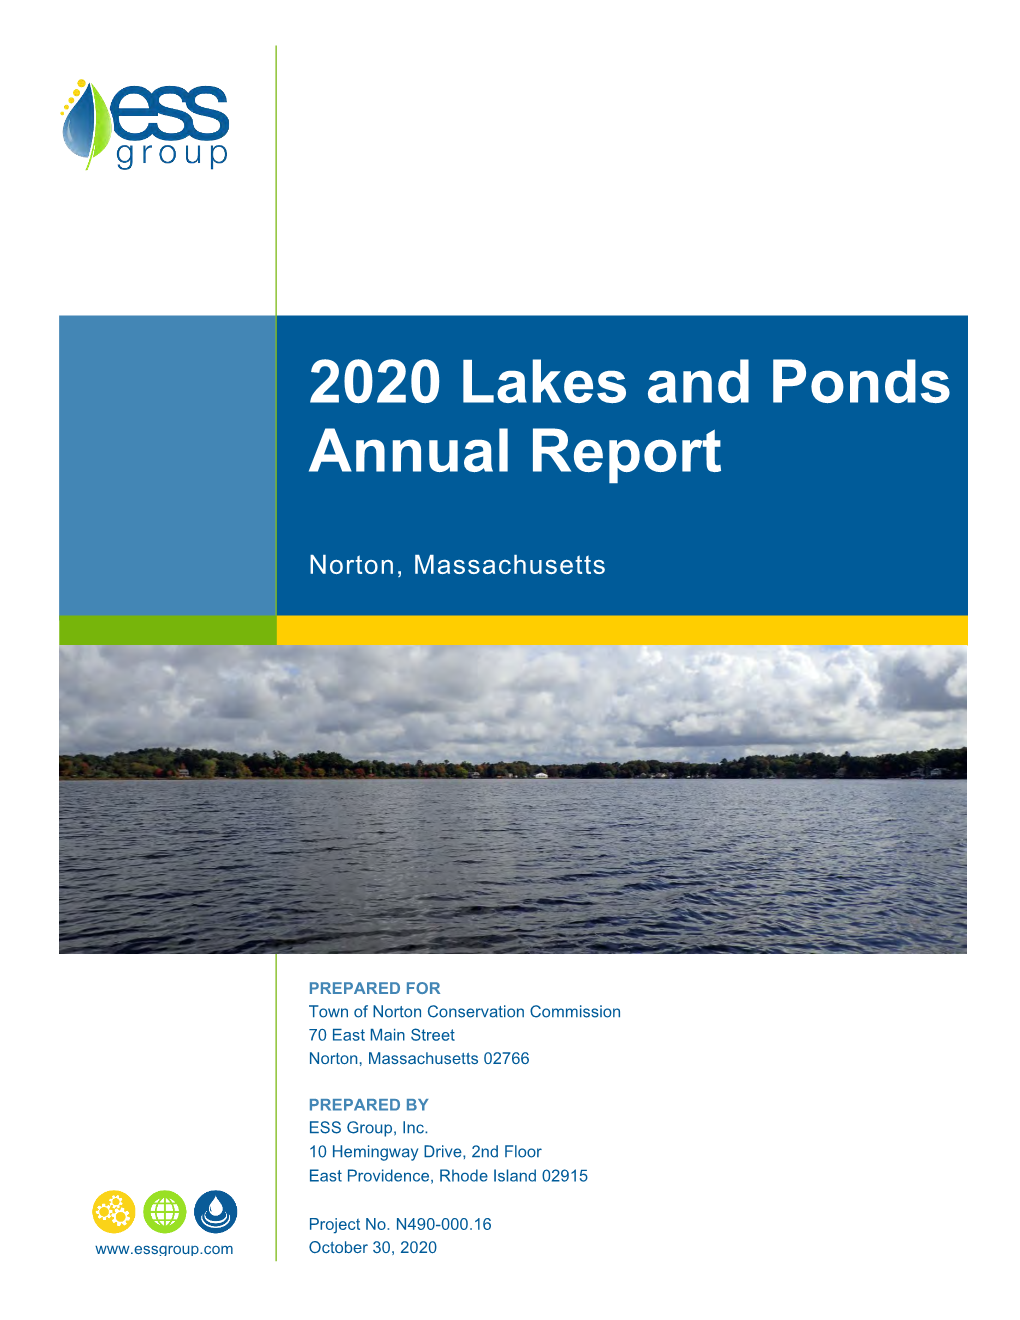 2020 Lakes and Ponds Annual Report